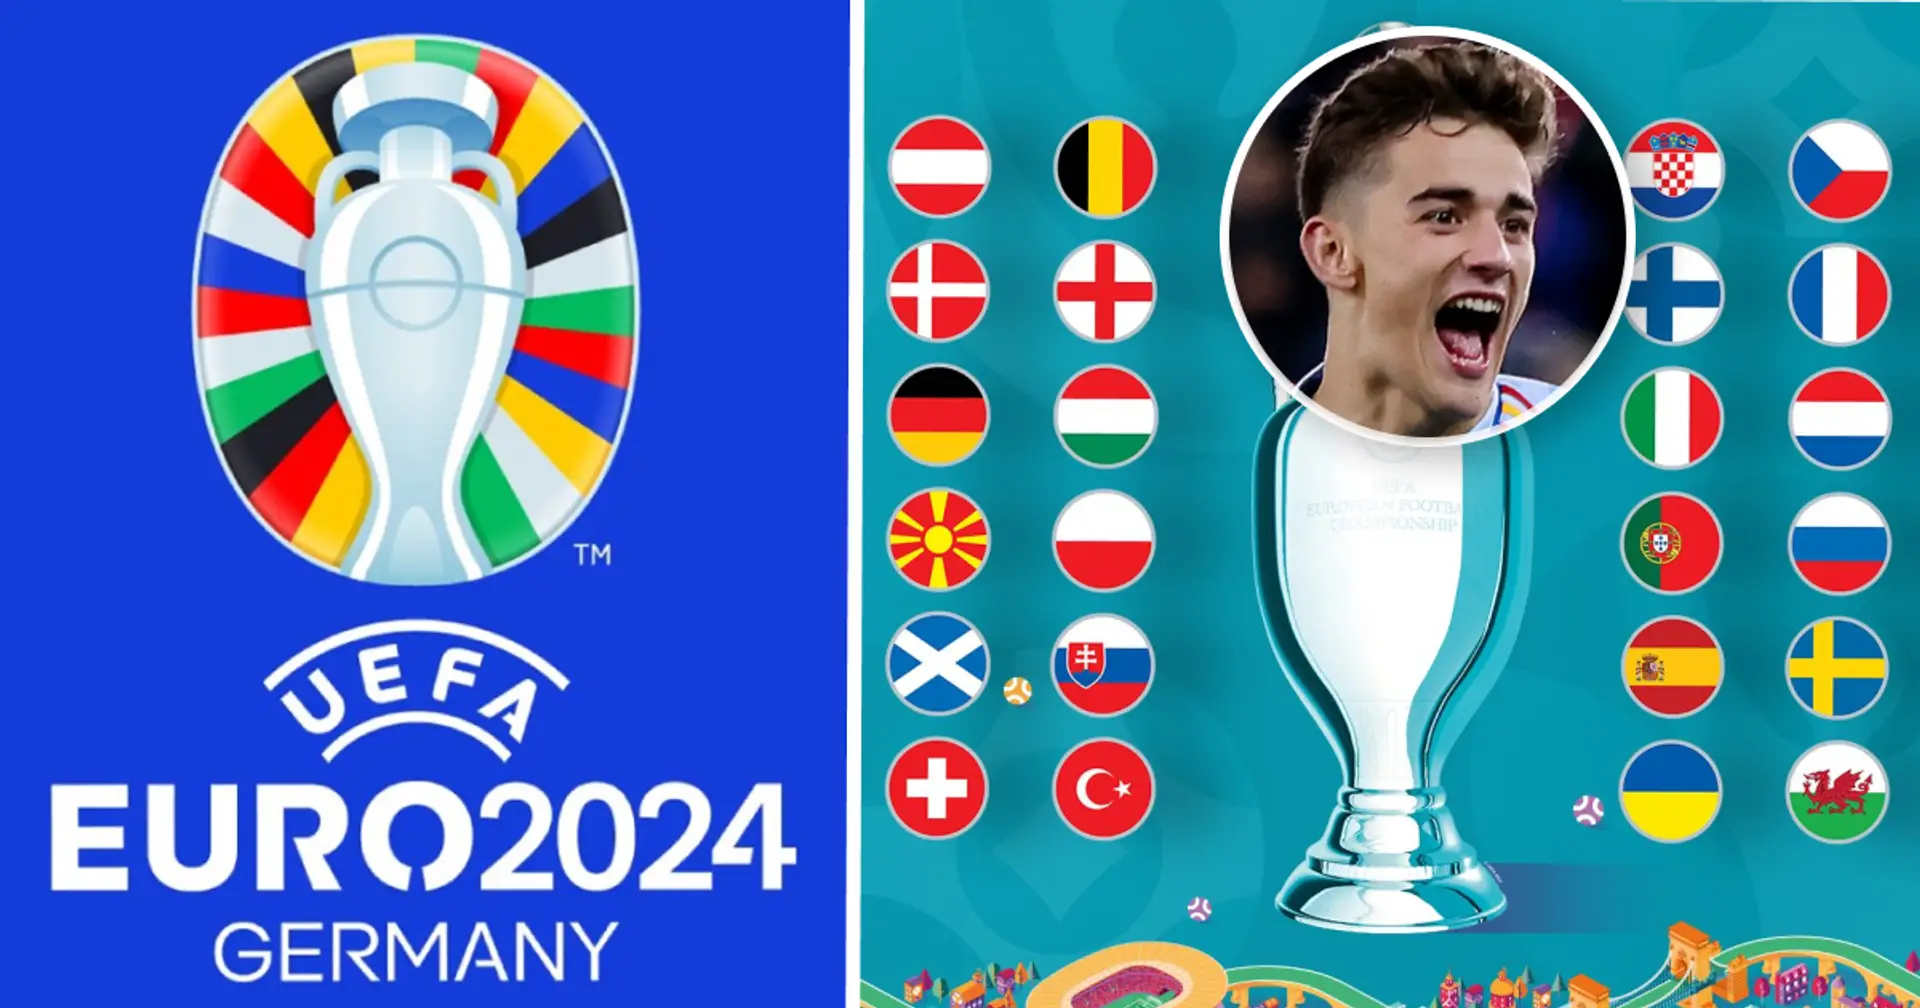 Which Barca players have already qualified for Euro 2024? Answered